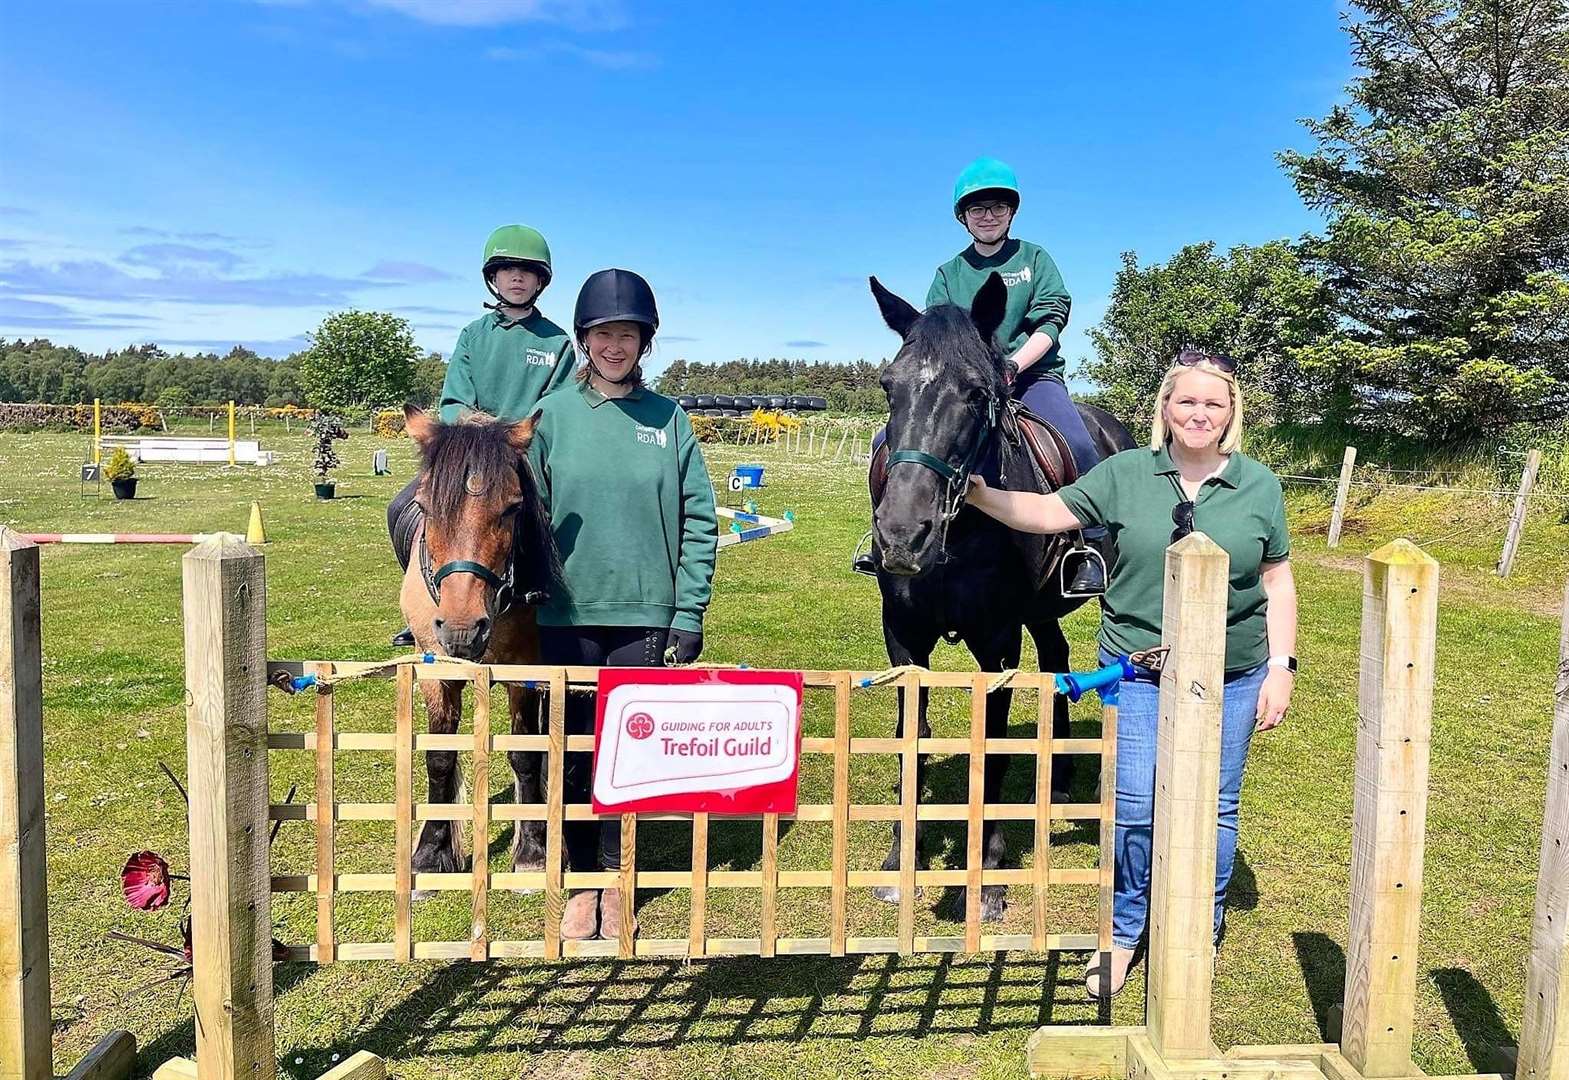 Young Caithness riders have success at equestrian competition